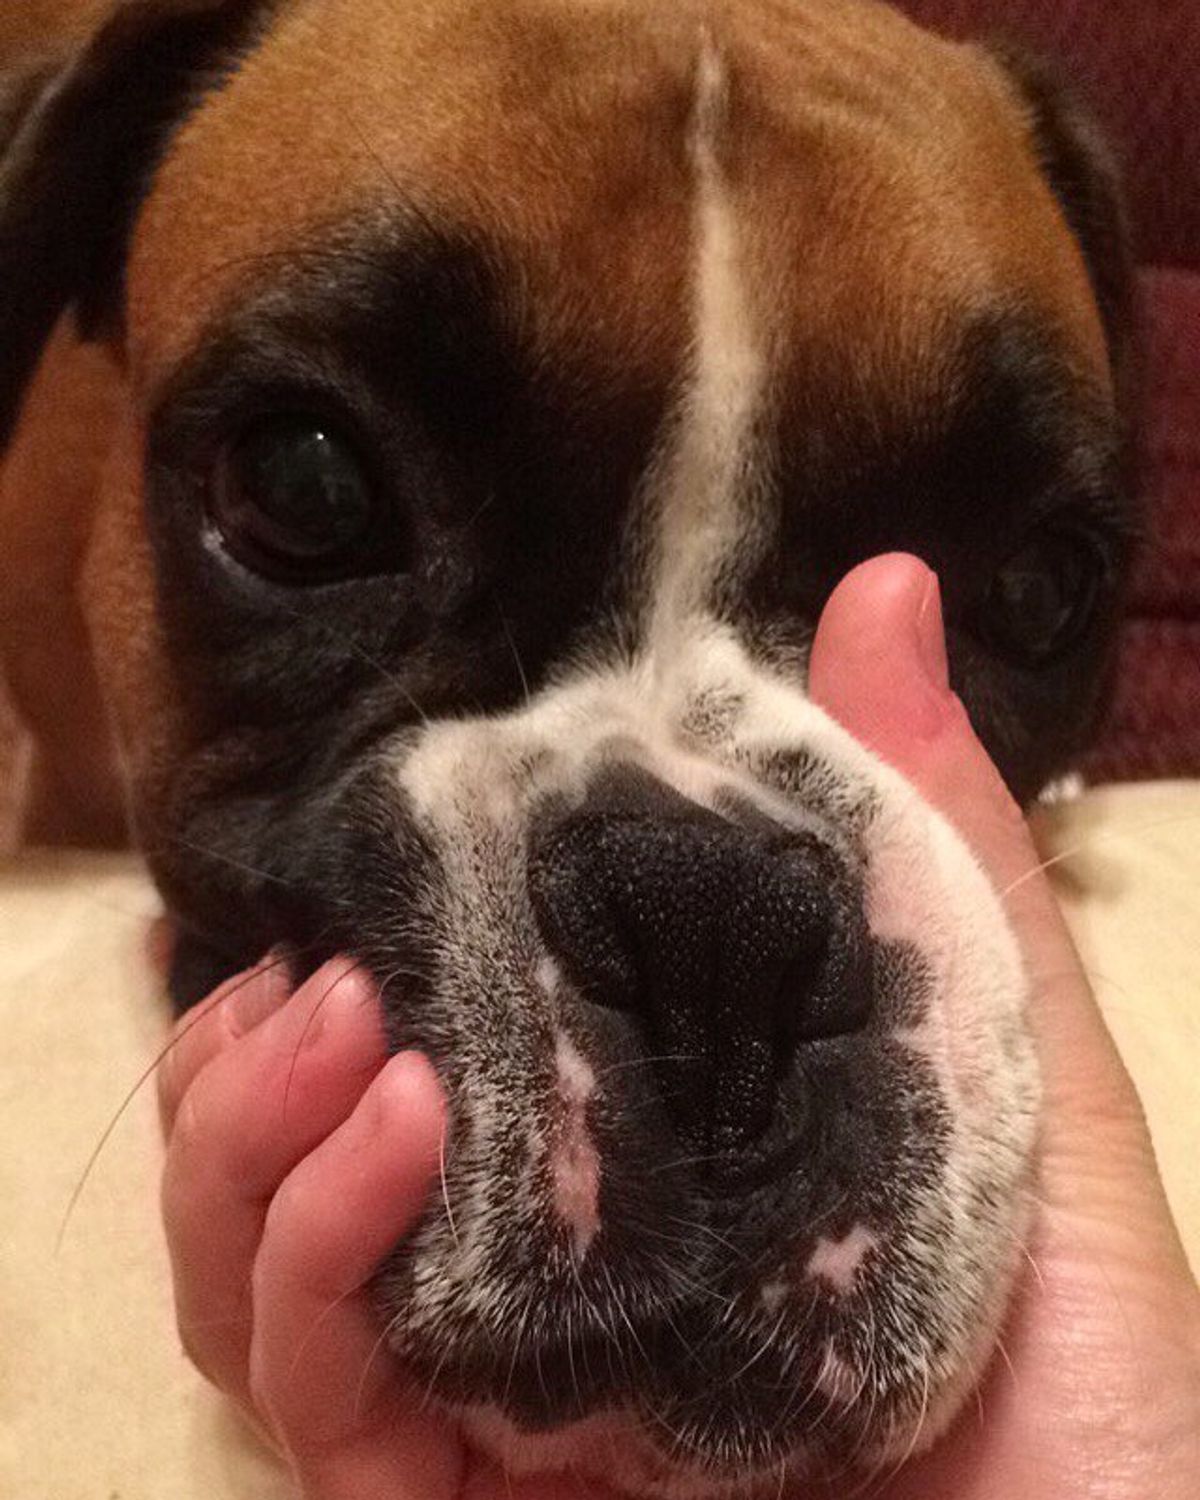 13 Of The Squishest-Faced Dogs You'll Ever See